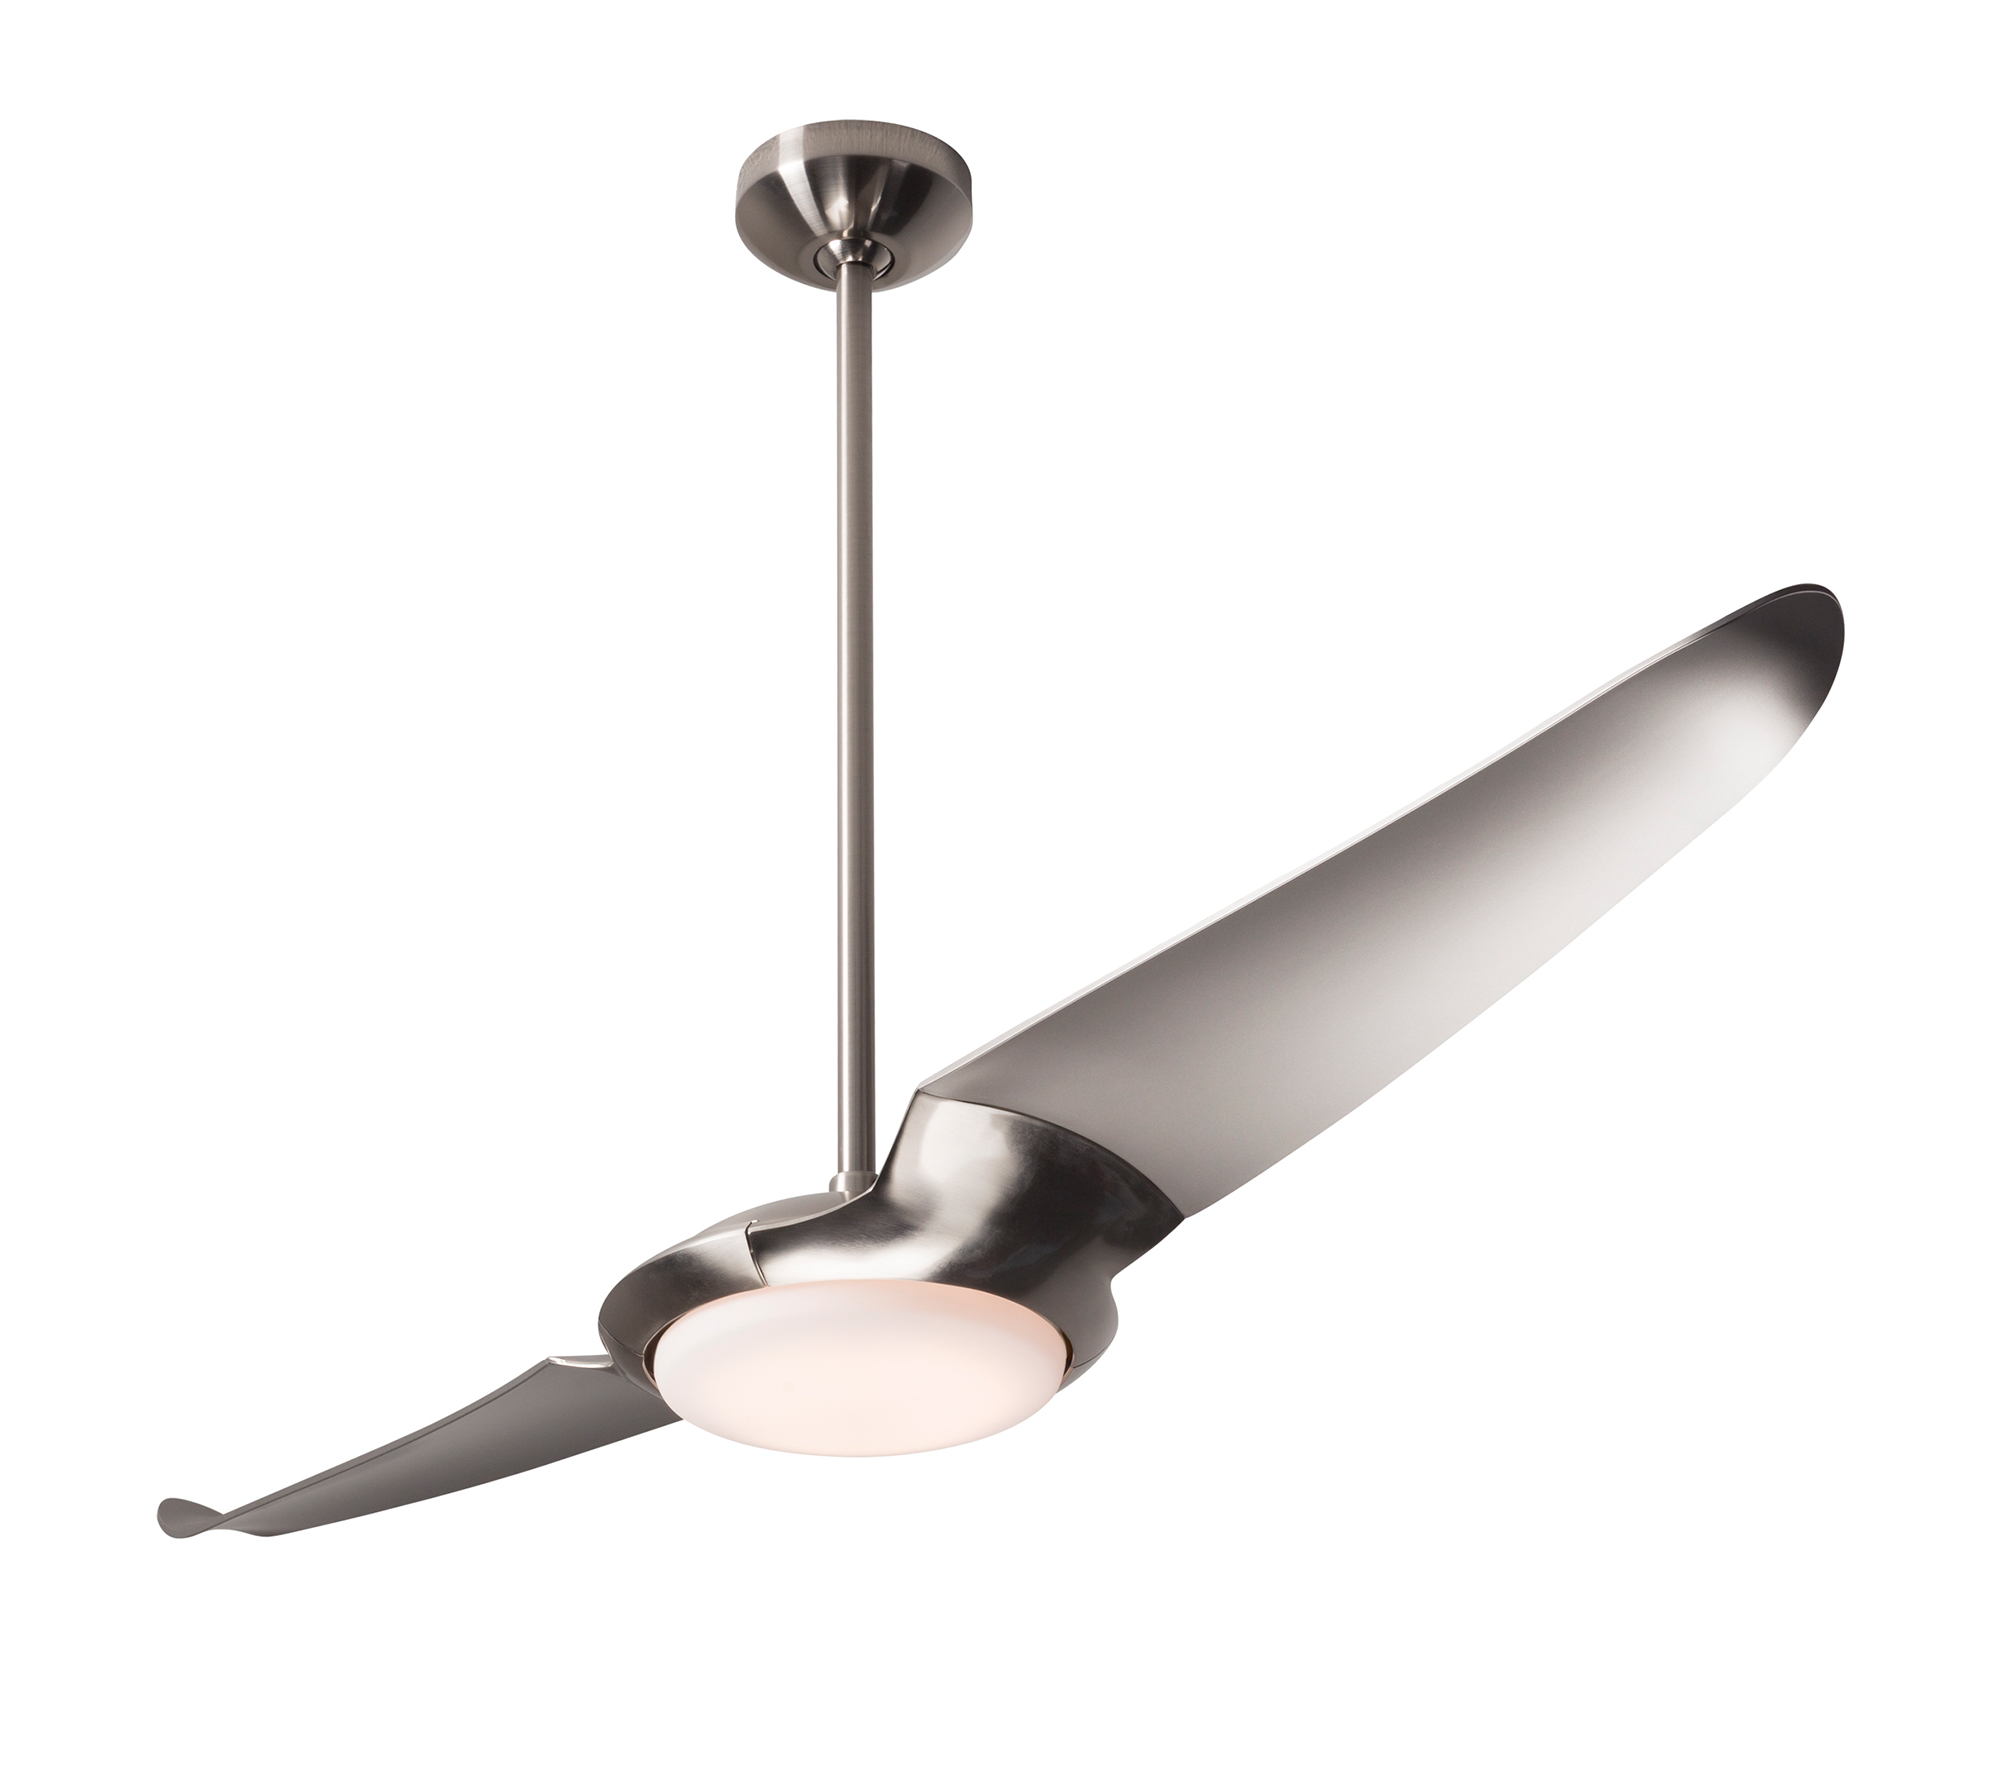 Ic Air2 Dc Ceiling Fan With Light By Modern Fan Co Ic2 Bn 56 Nk 570 Rc